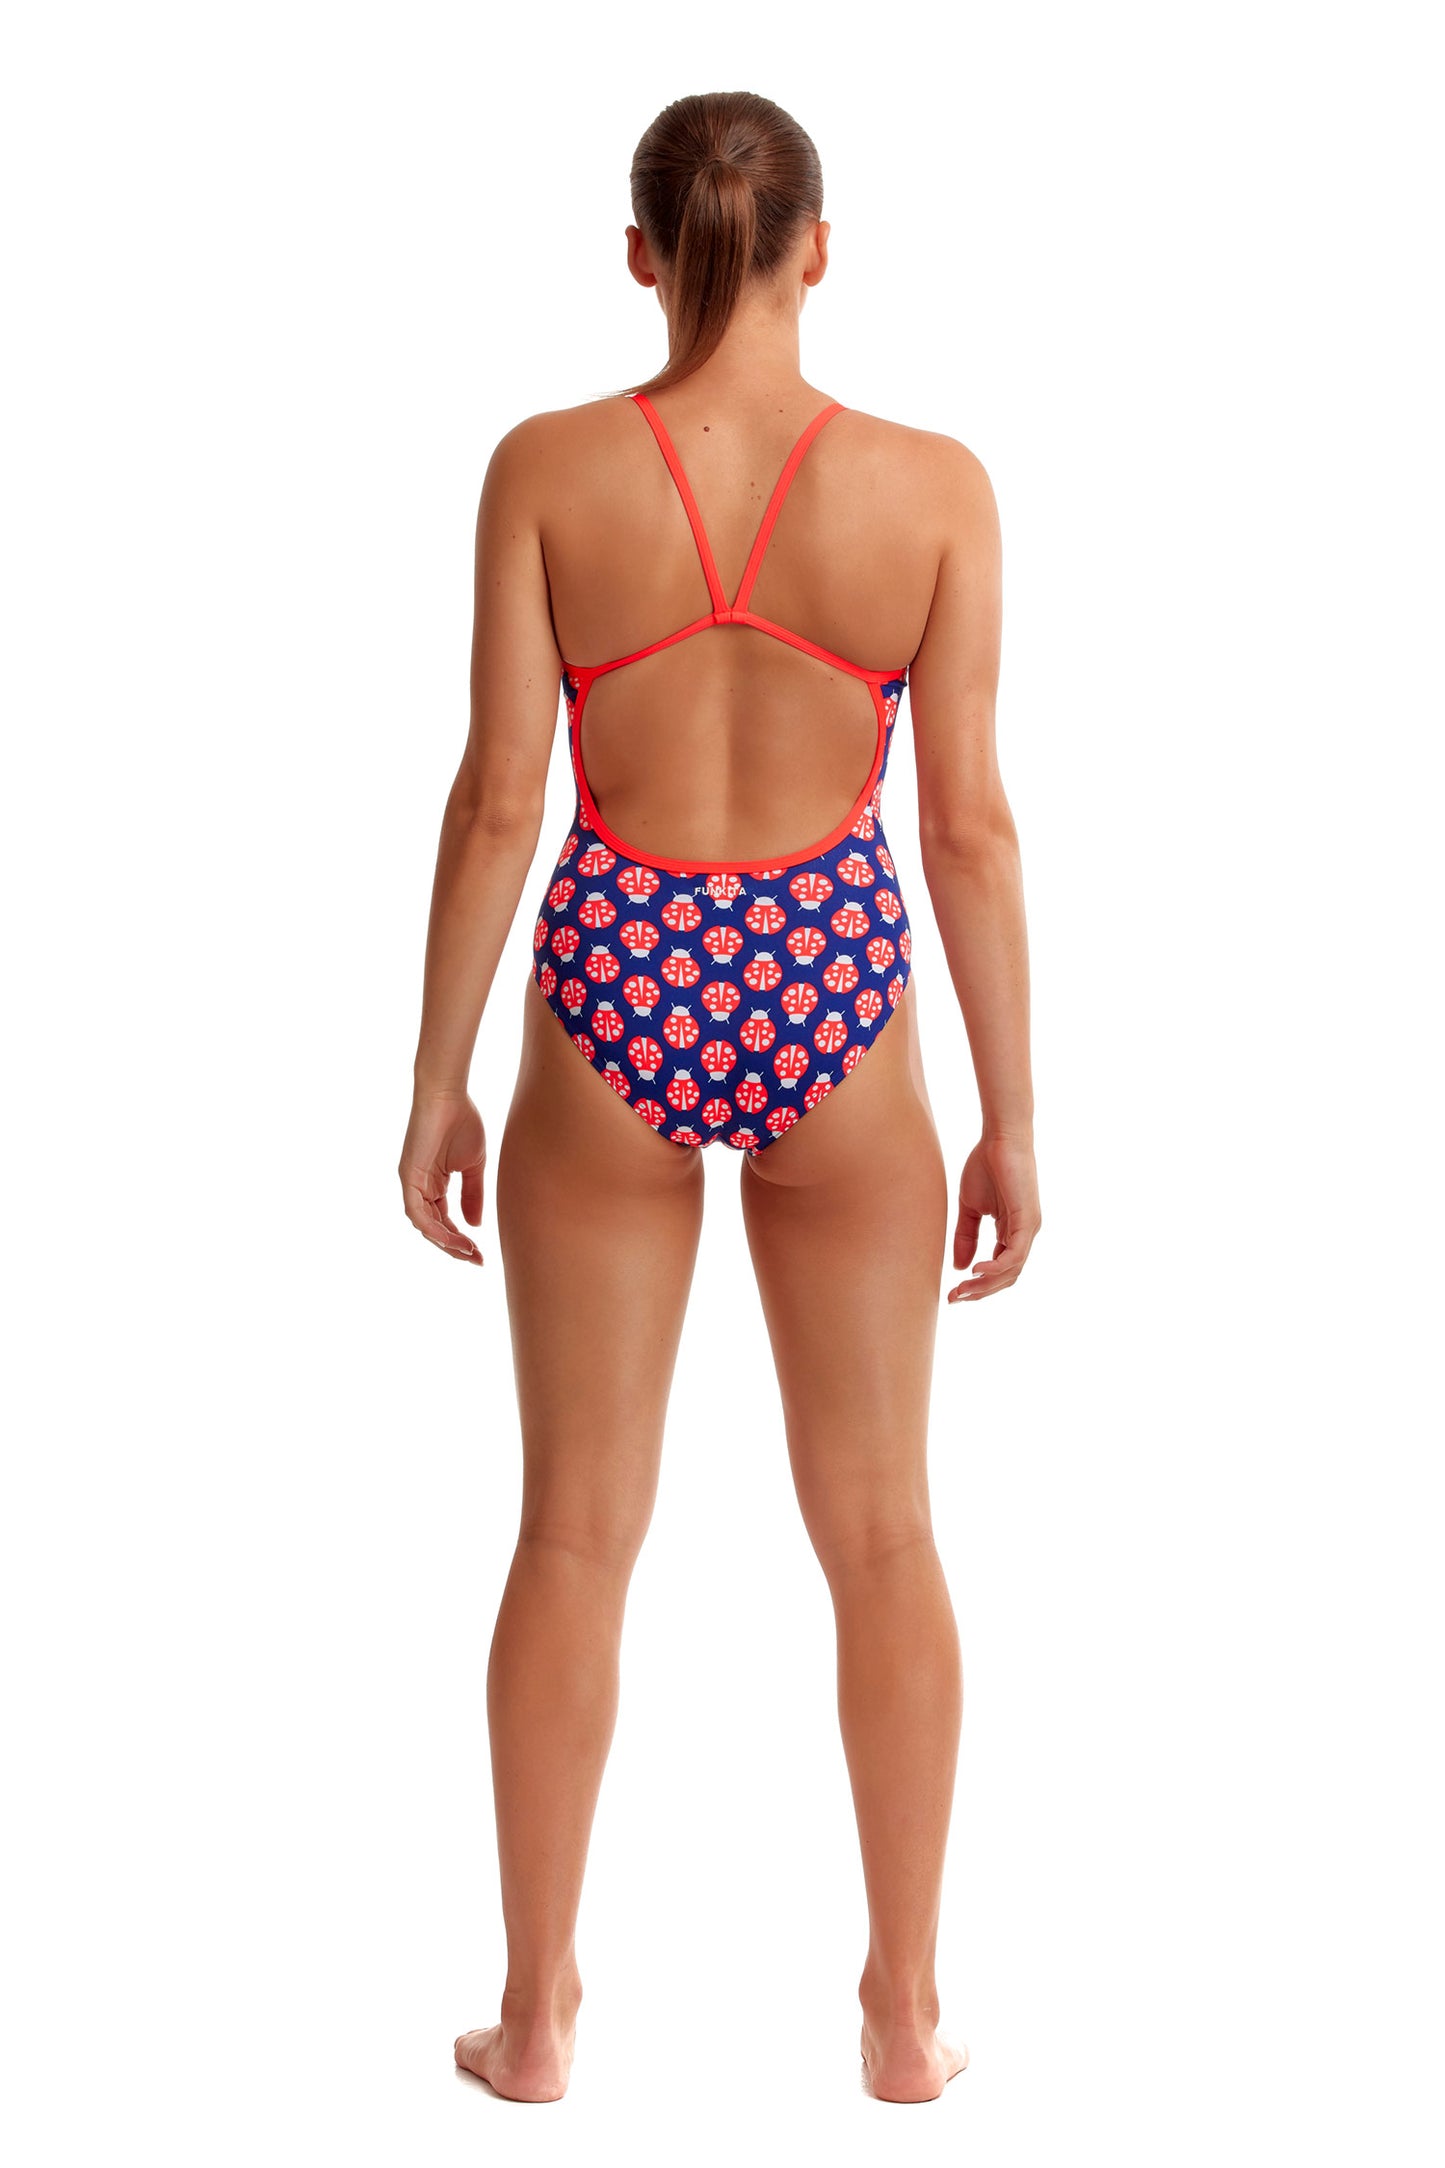 LAST ONE! Funkita Ladies Single Strap One Piece Been Bugged